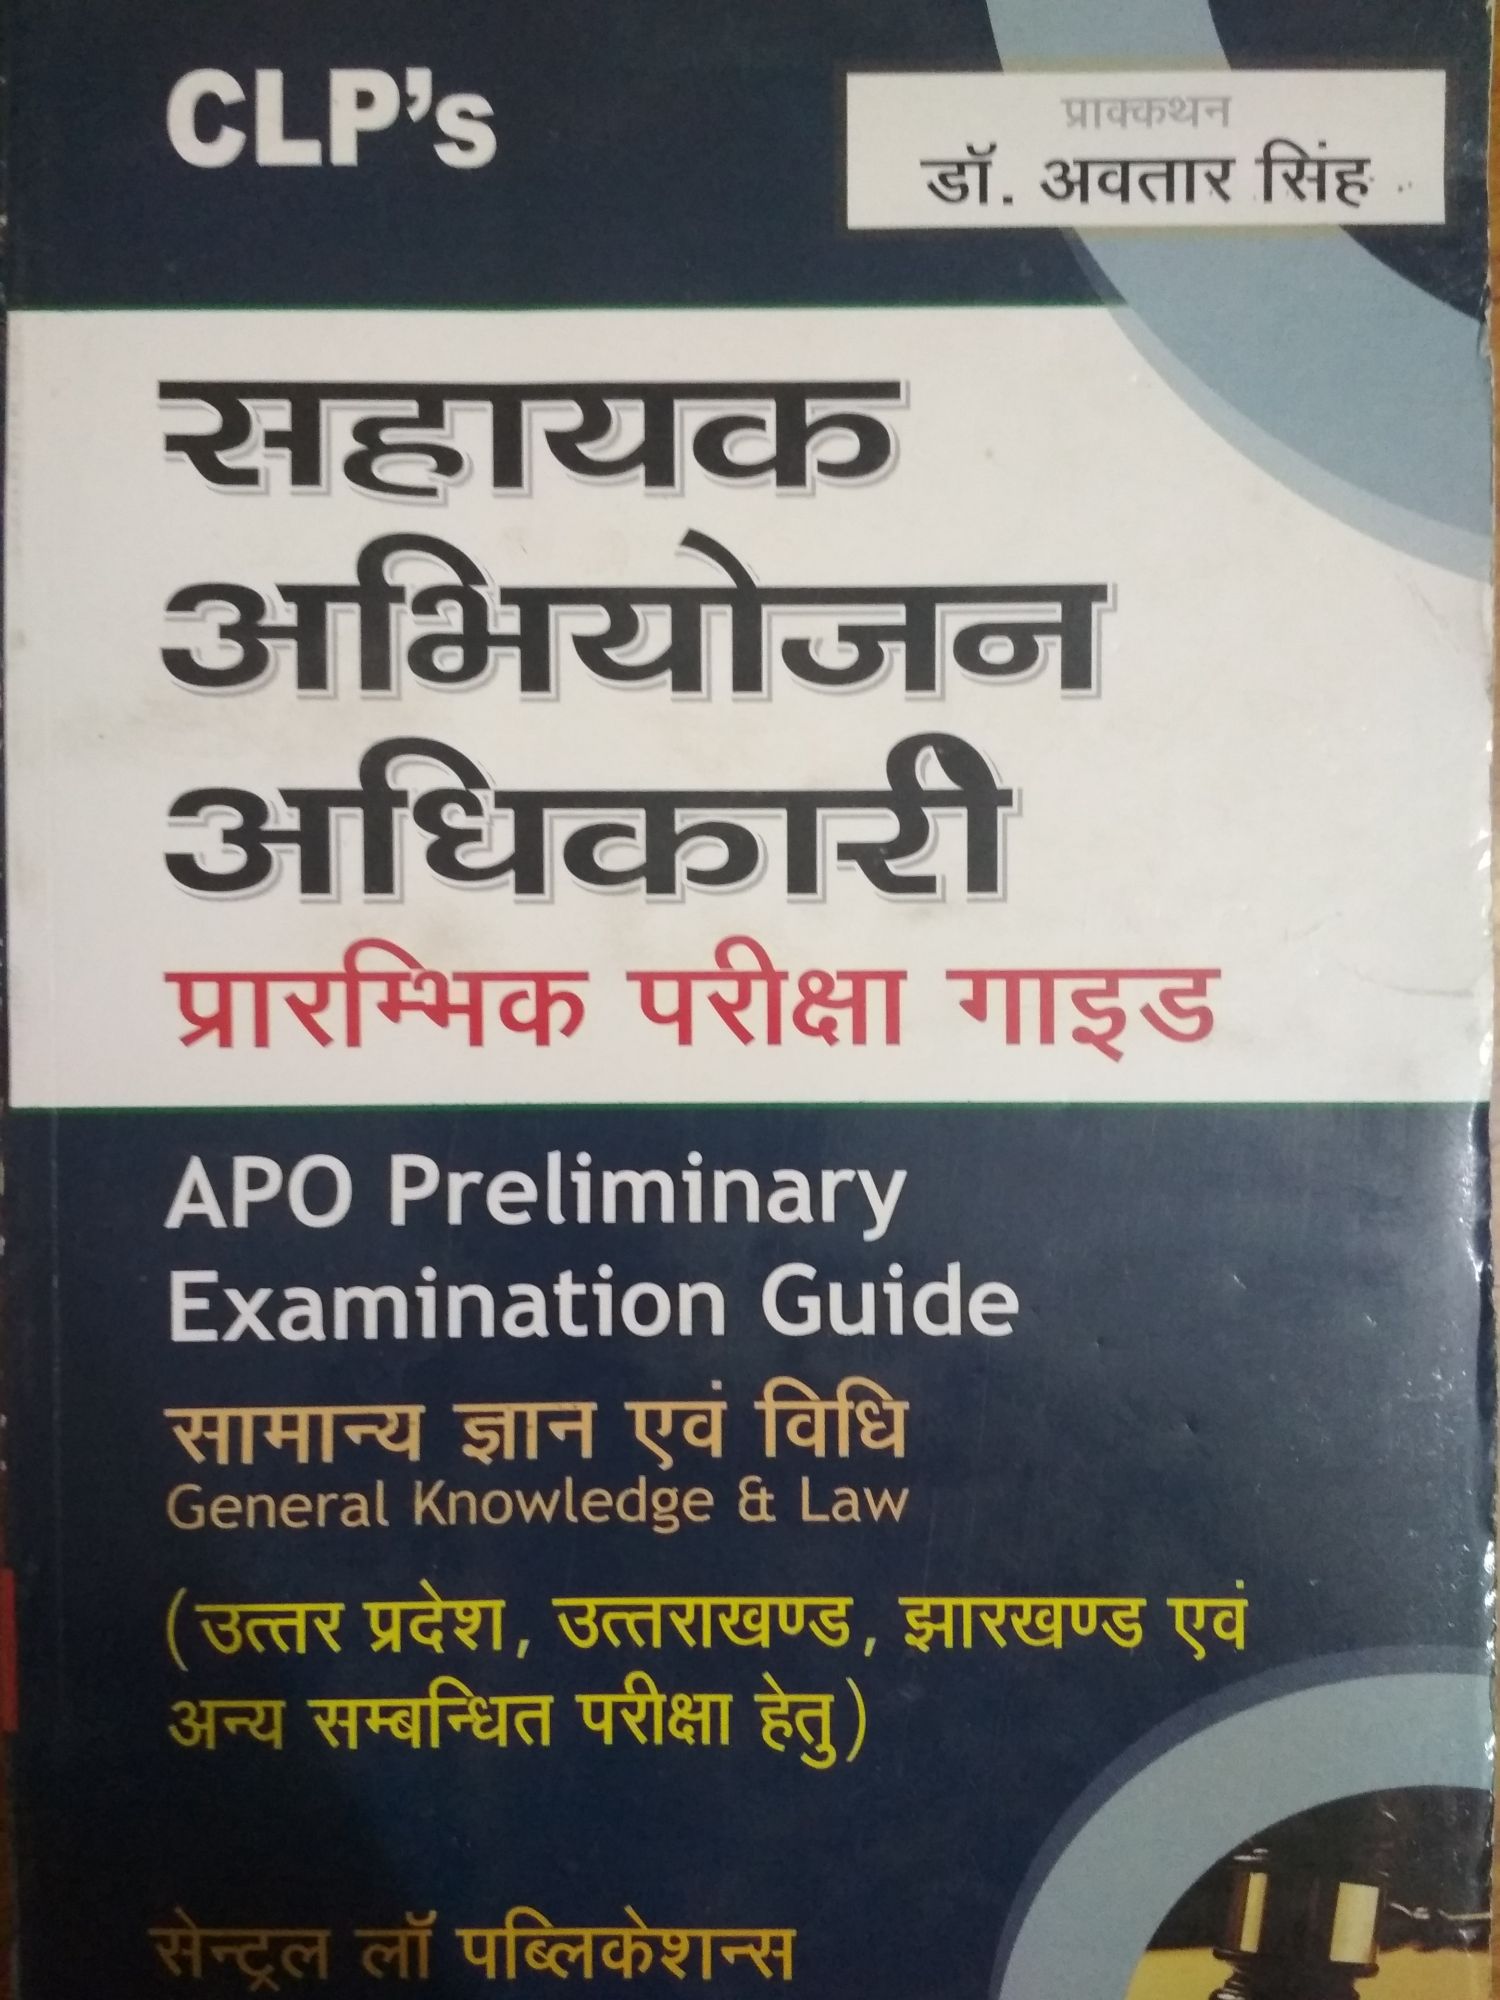 CLP Apo Preliminary Examination Guide For All State